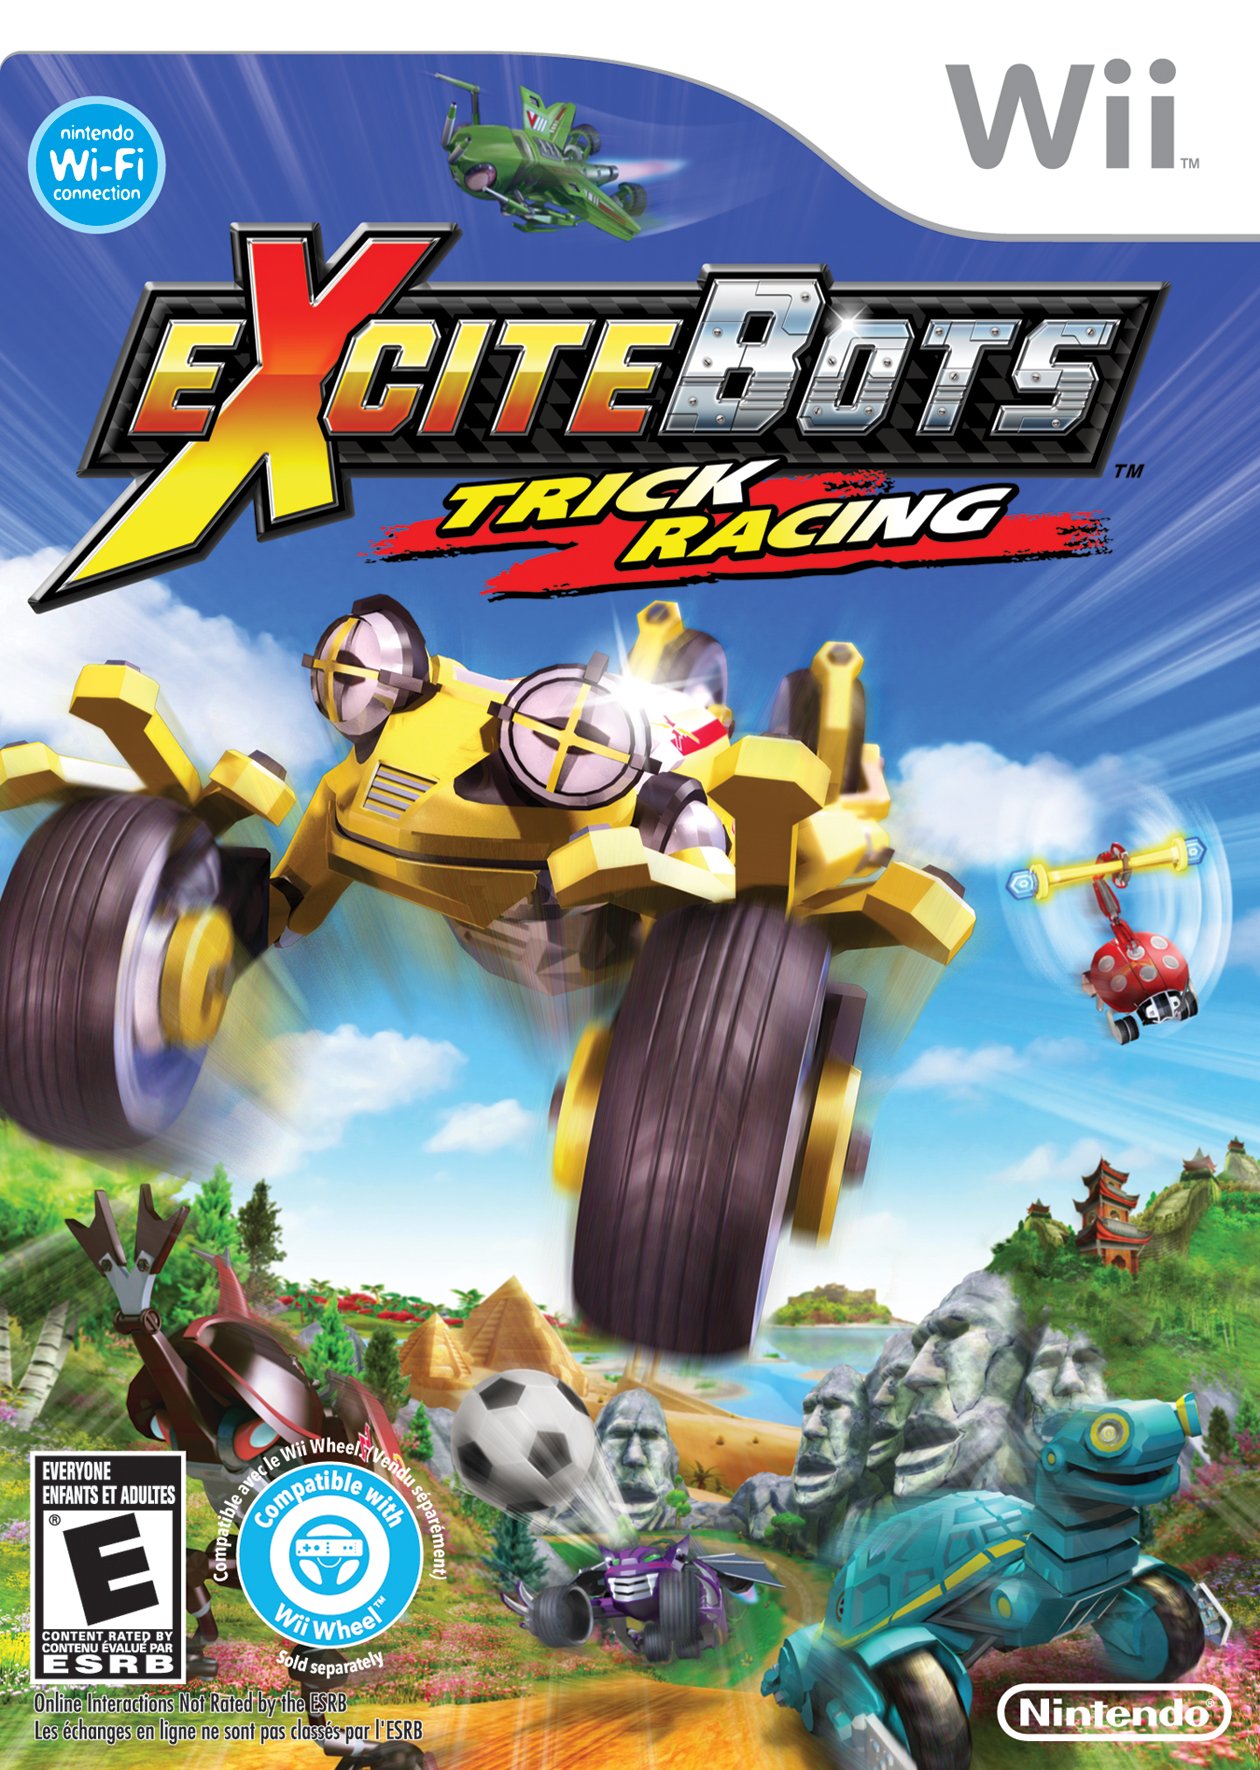 ExciteBots: Trick Racing - Nintendo Wii (Game Only)